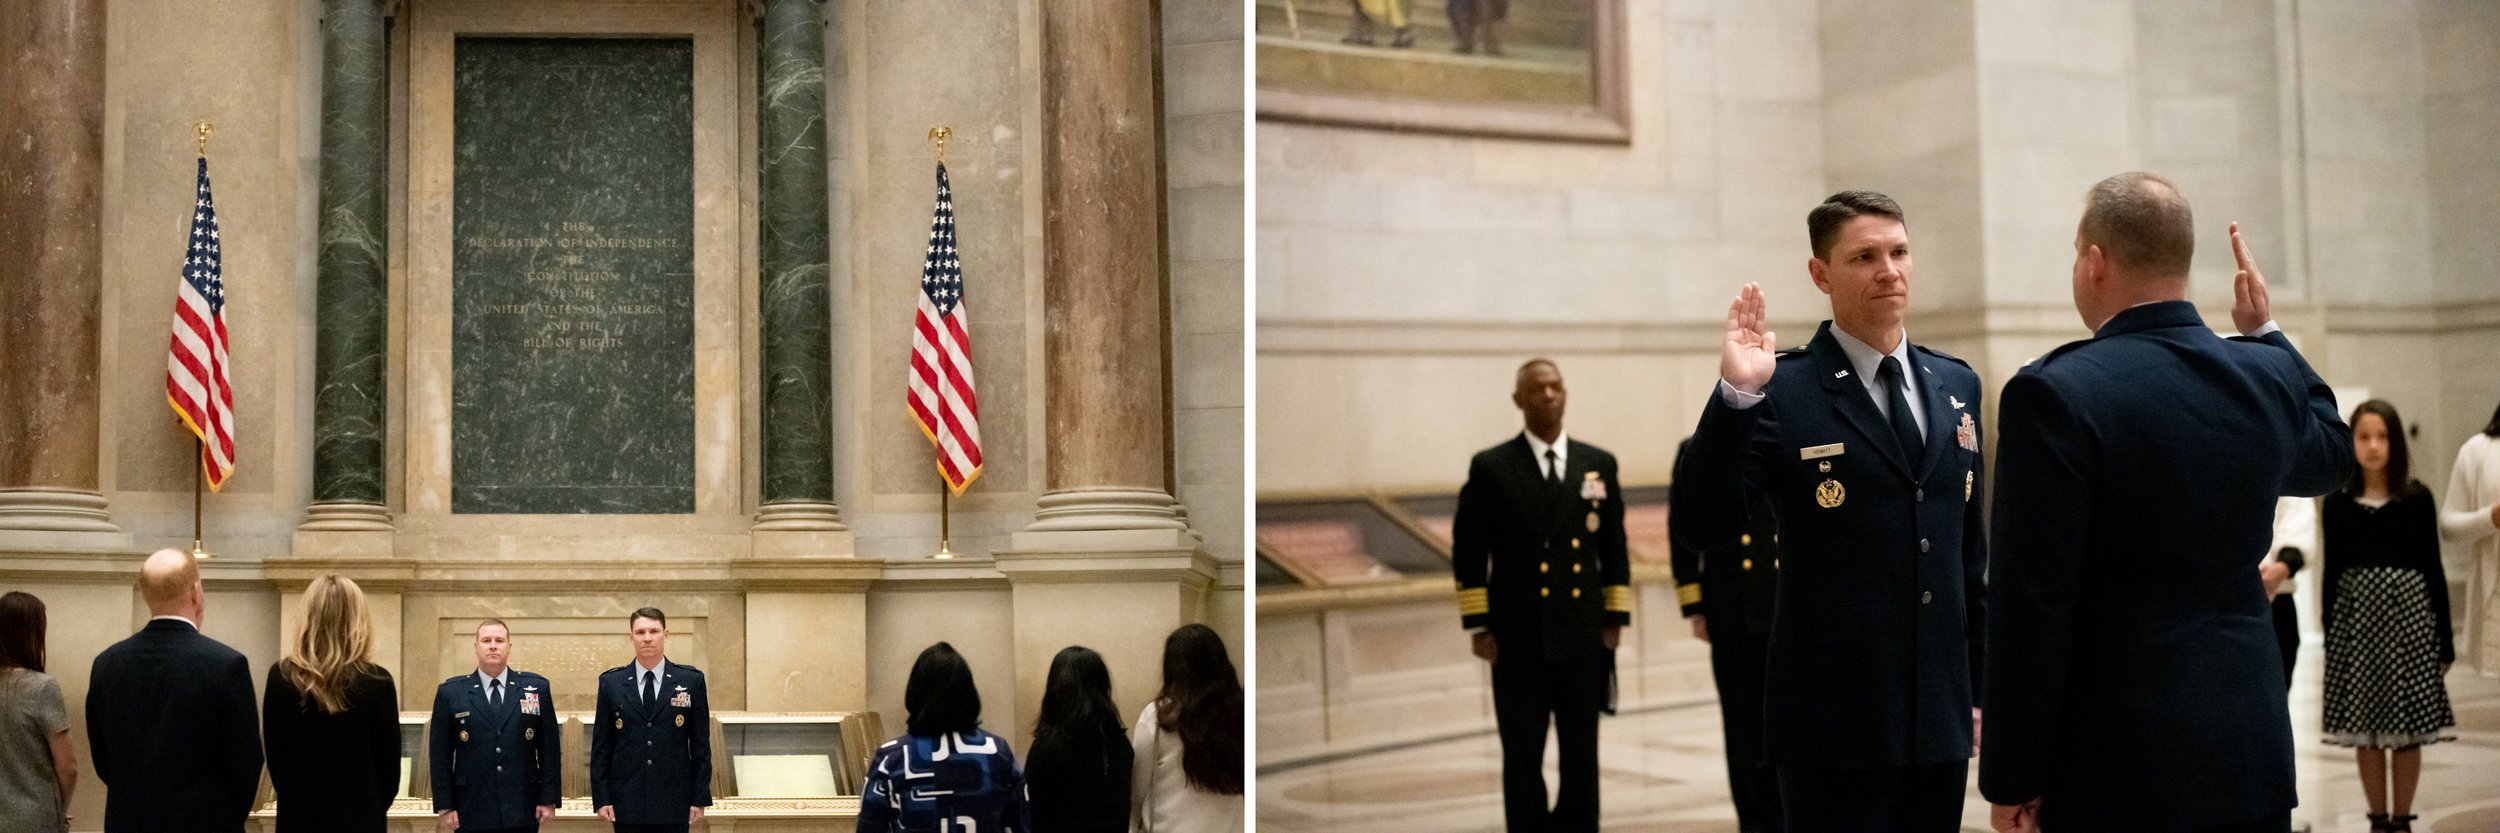 Military Promotion Ceremony at The National Archives in Washington DC photography